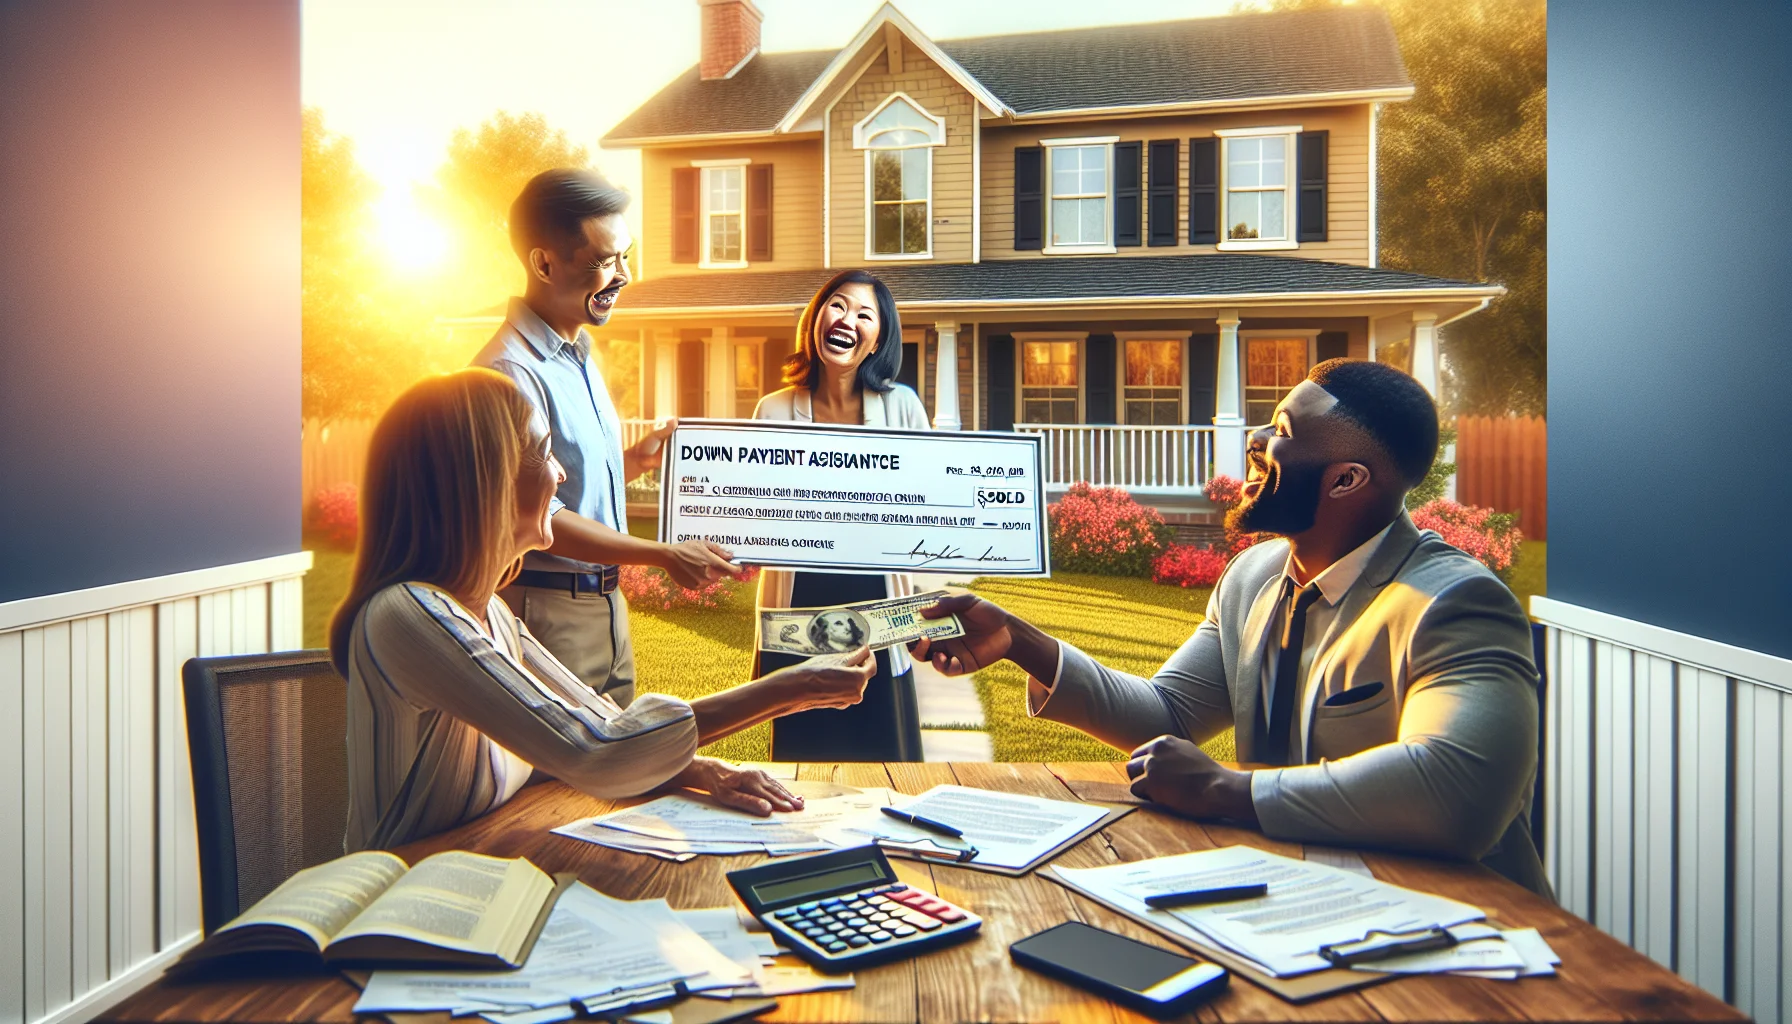 Create a lively and humorous image of an ideal yet realistic scenario centered around down payment assistance for a conventional home loan. Illustrate a South Asian female real estate agent handing over an oversize check to a joyful African-American couple who just finalized their mortgage loan agreement, in the backdrop, an attractive and quaint suburban house bathes in golden sunlight. Activity revolves around a table full of paperwork; add a mild touch of chaos with papers and calculator scatter. Highlight the 'Sold' sign in the front yard, and any other small, funny details that contribute to this perfect real estate scenario.